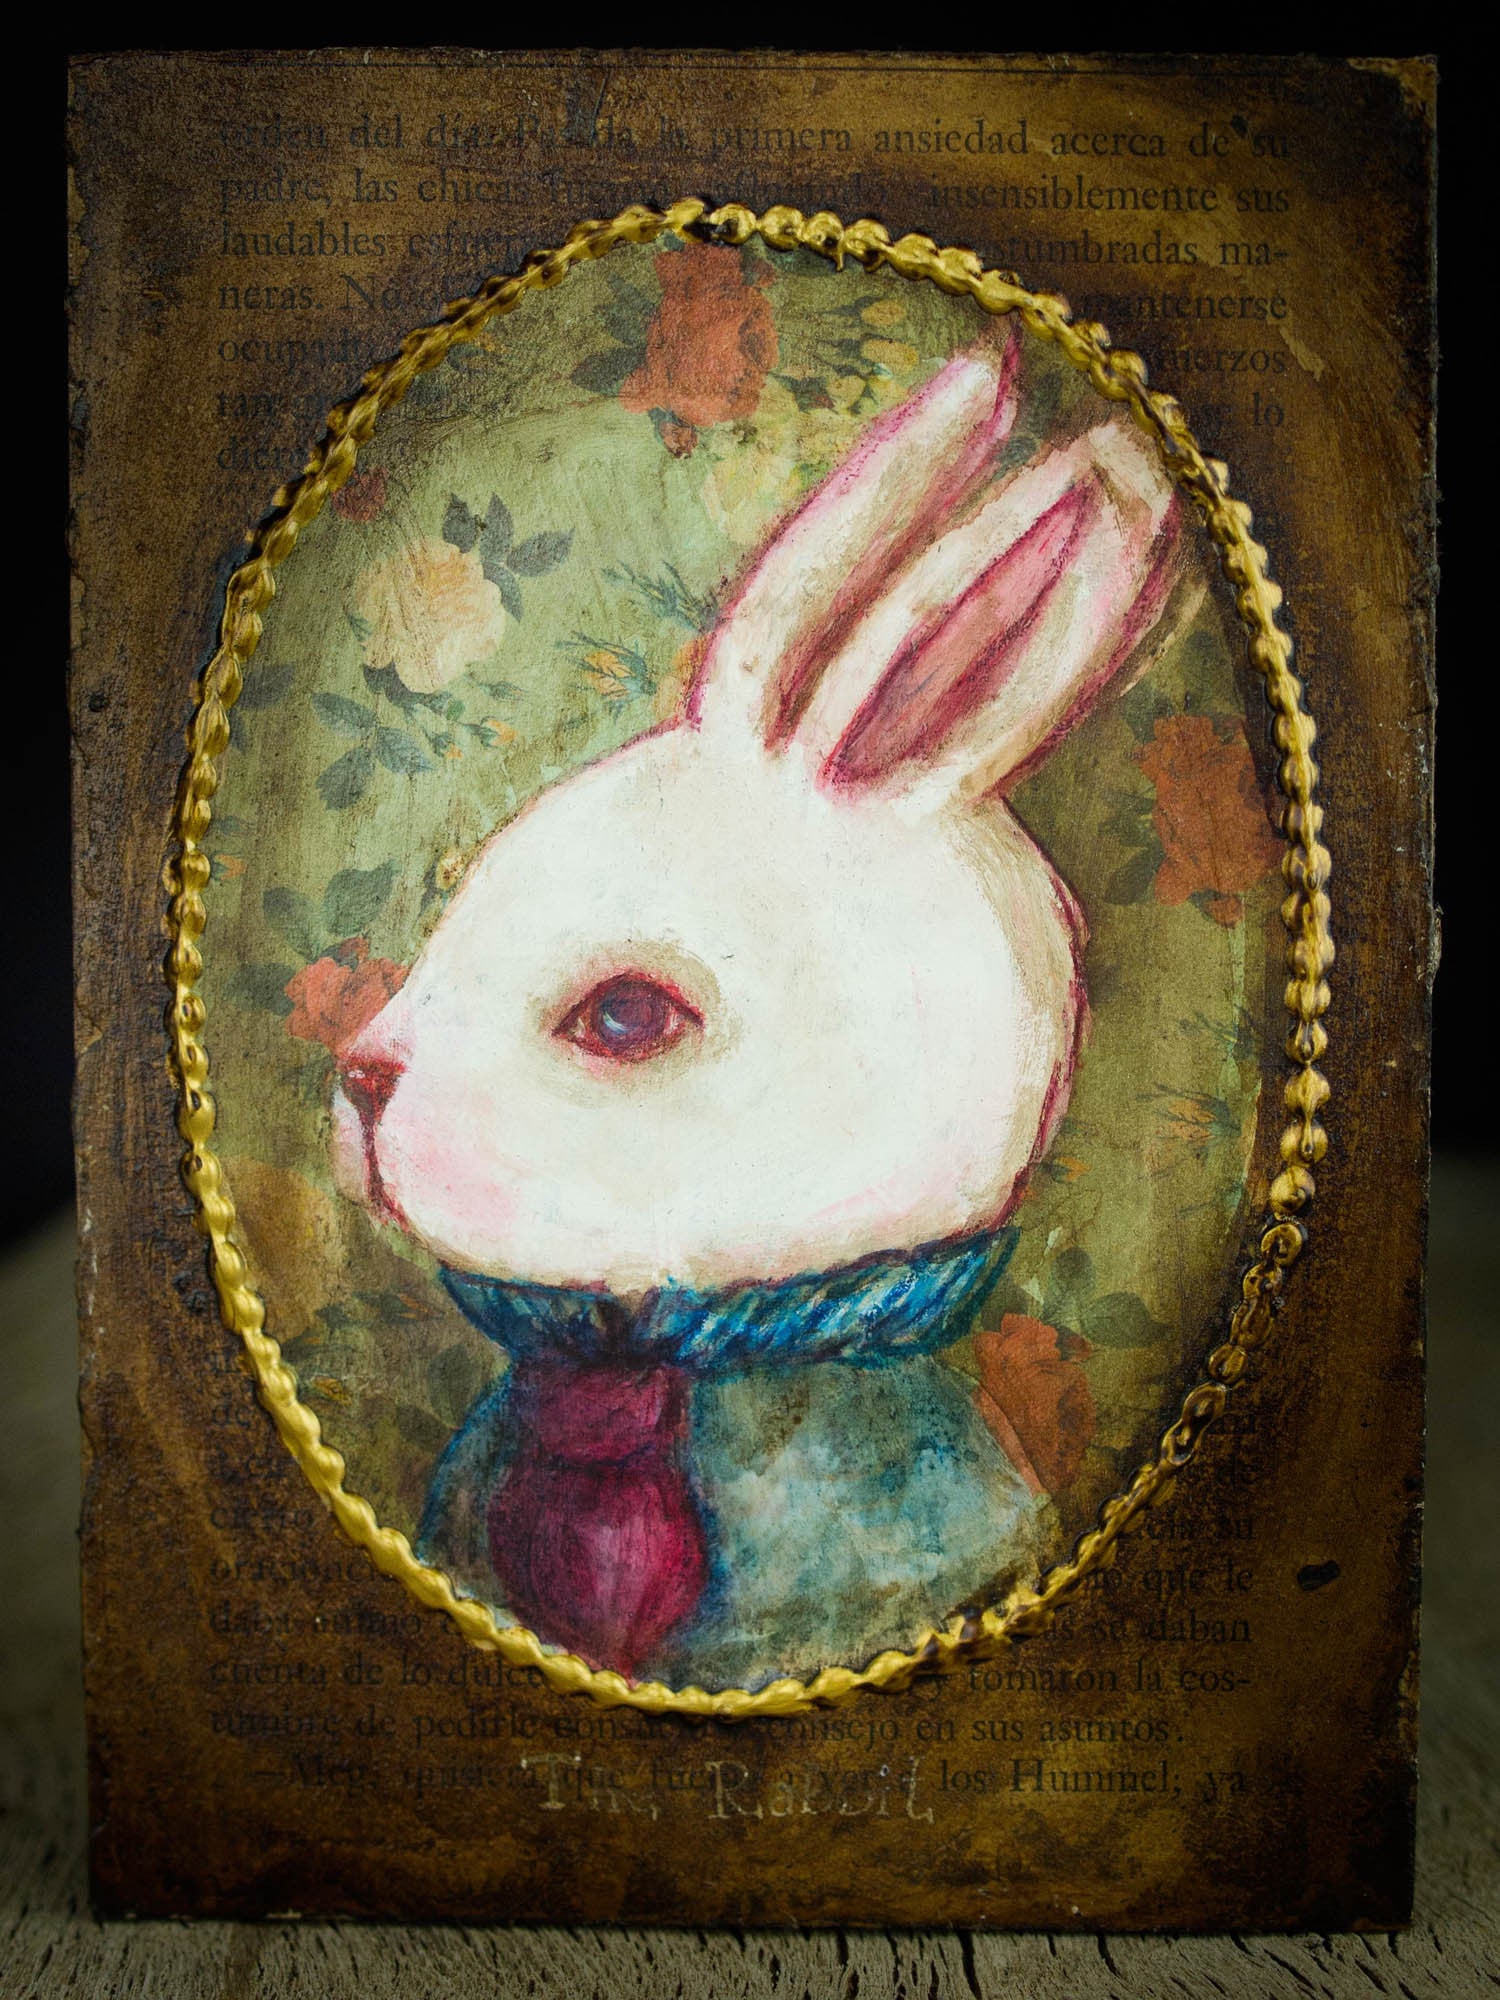 Alice's wild chase of a white rabbit took her on amazing adventures adventures in Wonderland, and here he is on this painting inspired by the beautiful book, created by Danita Art.